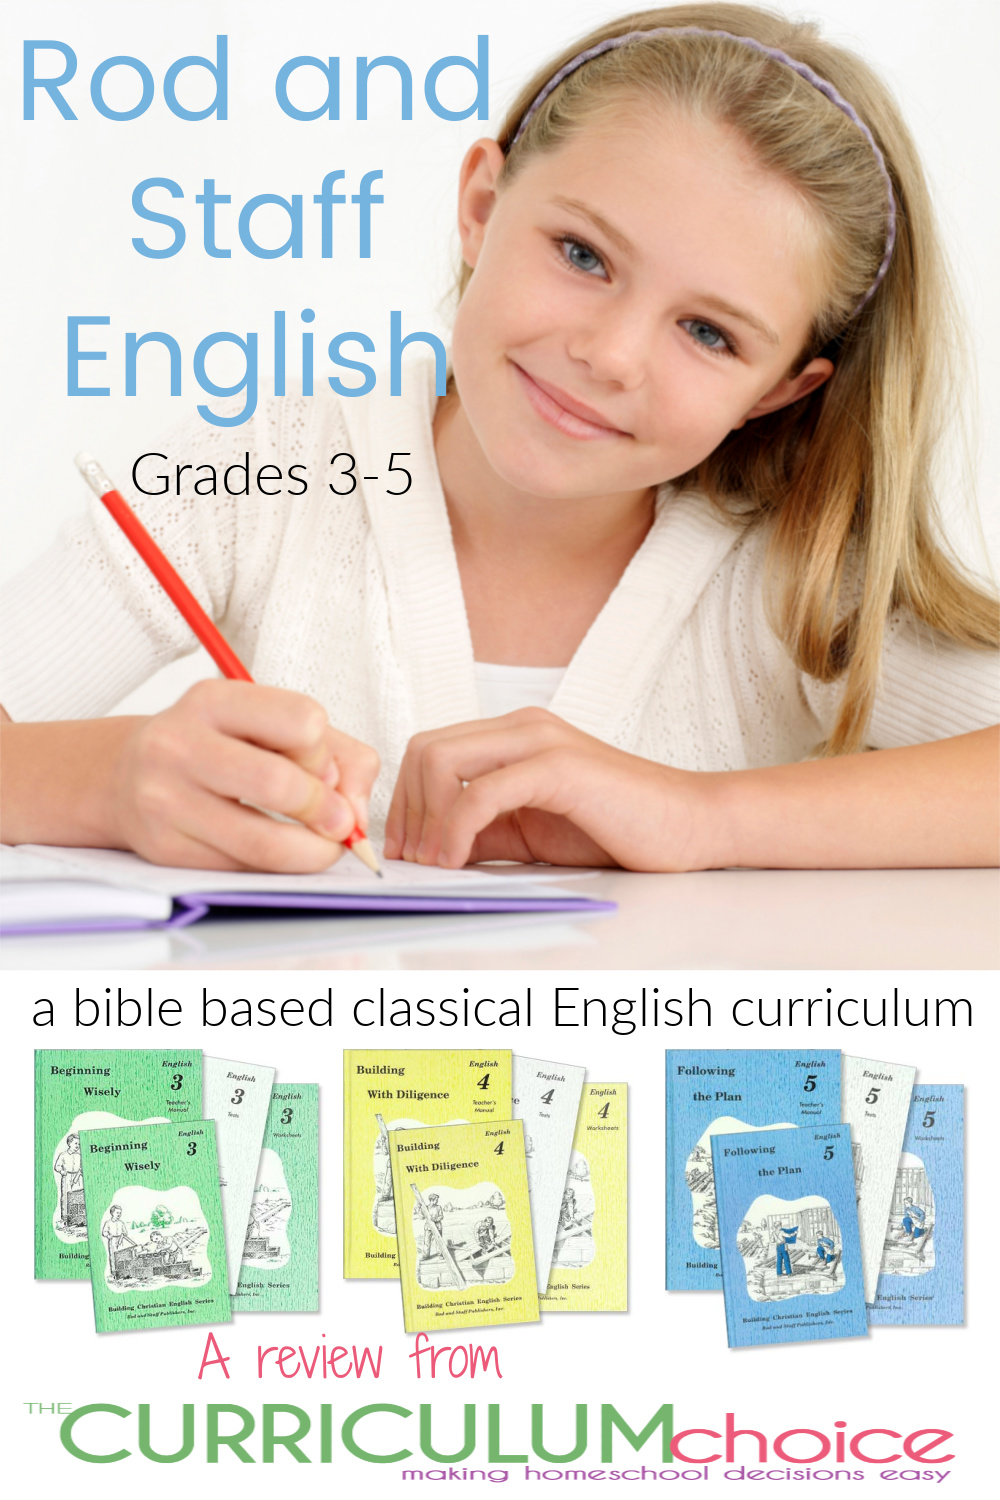 Rod and Staff English Grades 3-5 is a Bible-based, classical English curriculum that teaches grammar and writing skills. A review from The Curriculum Choice